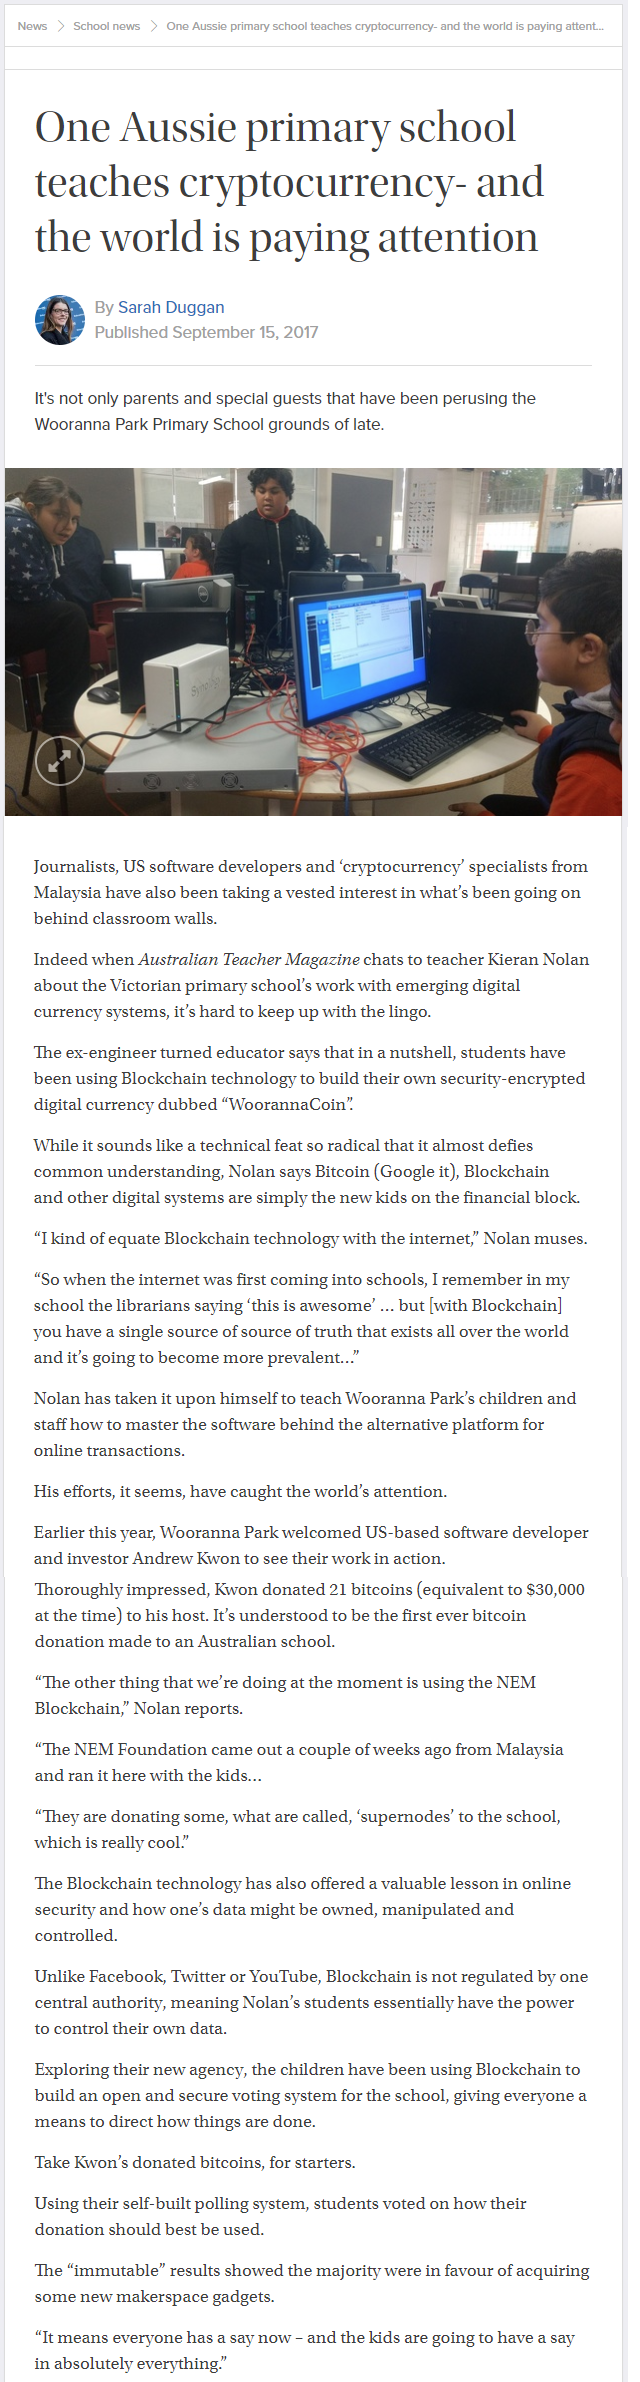 One Aussie primary school teaches cryptocurrency- and the world is paying attention.png